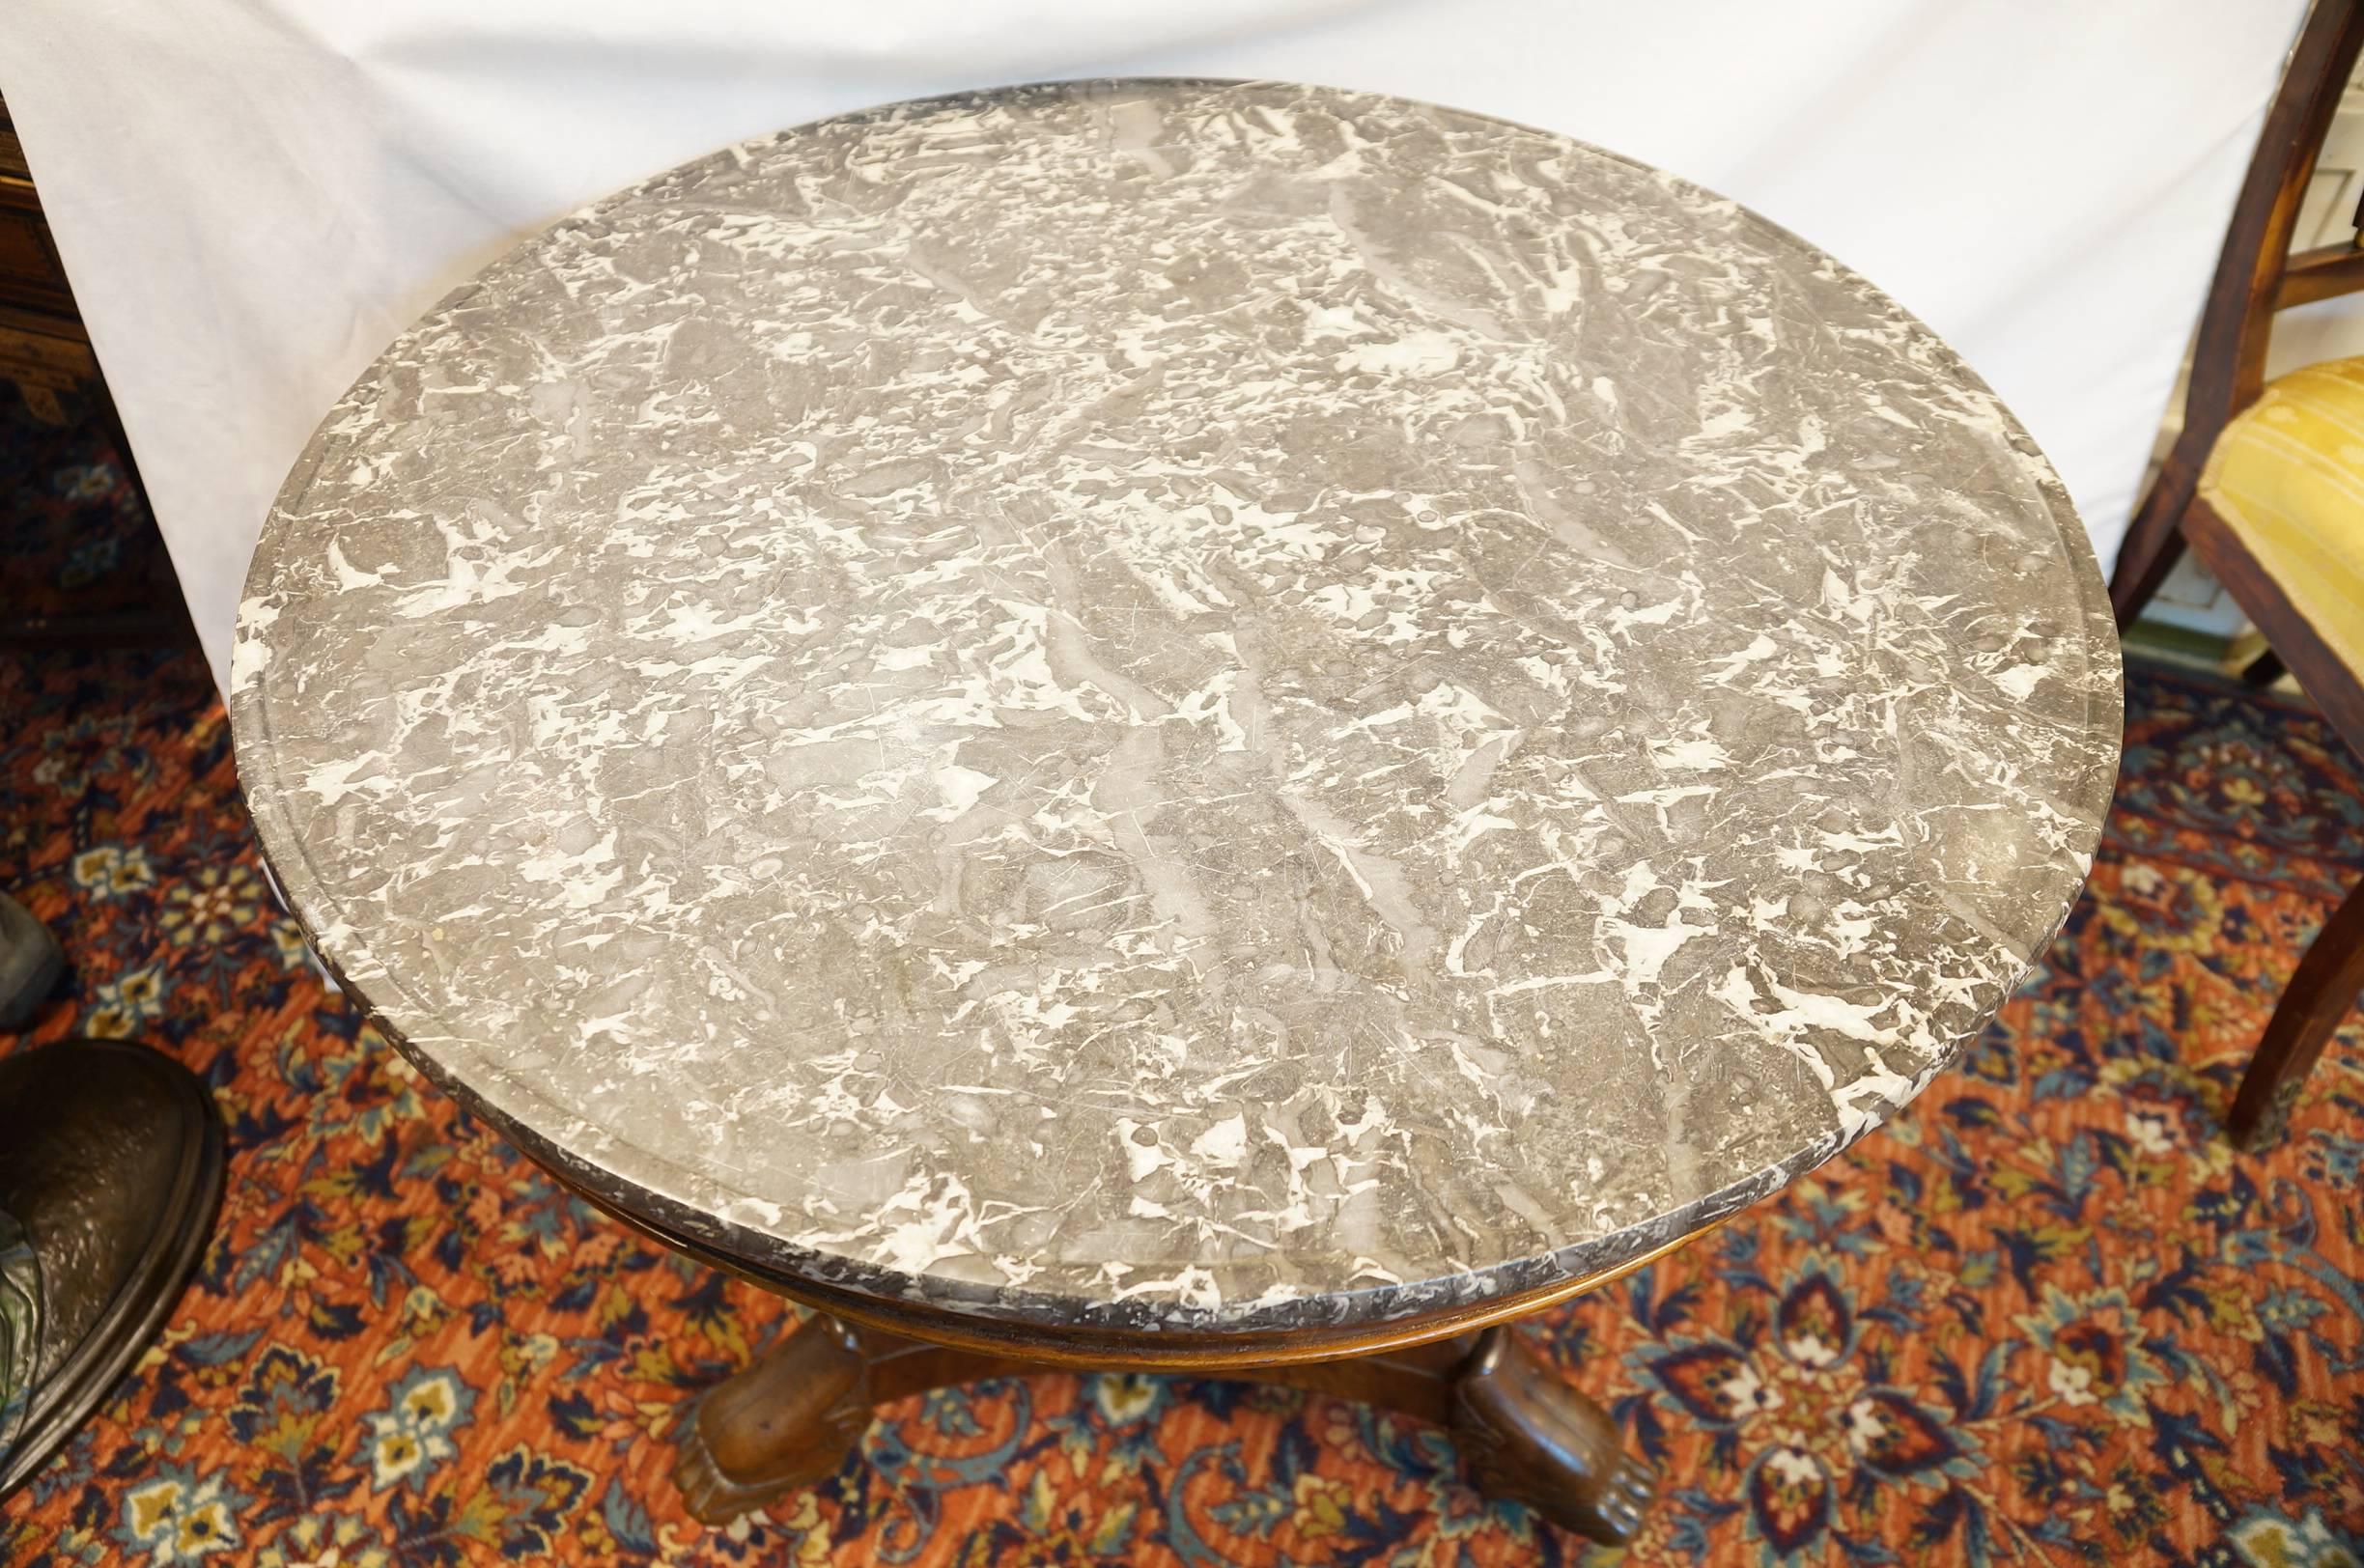 French Empire Round Marble Top Center Table with Classical Bronze Mounted Figures on Paw Feet
Beveled Marble Top
Stock Number: F108